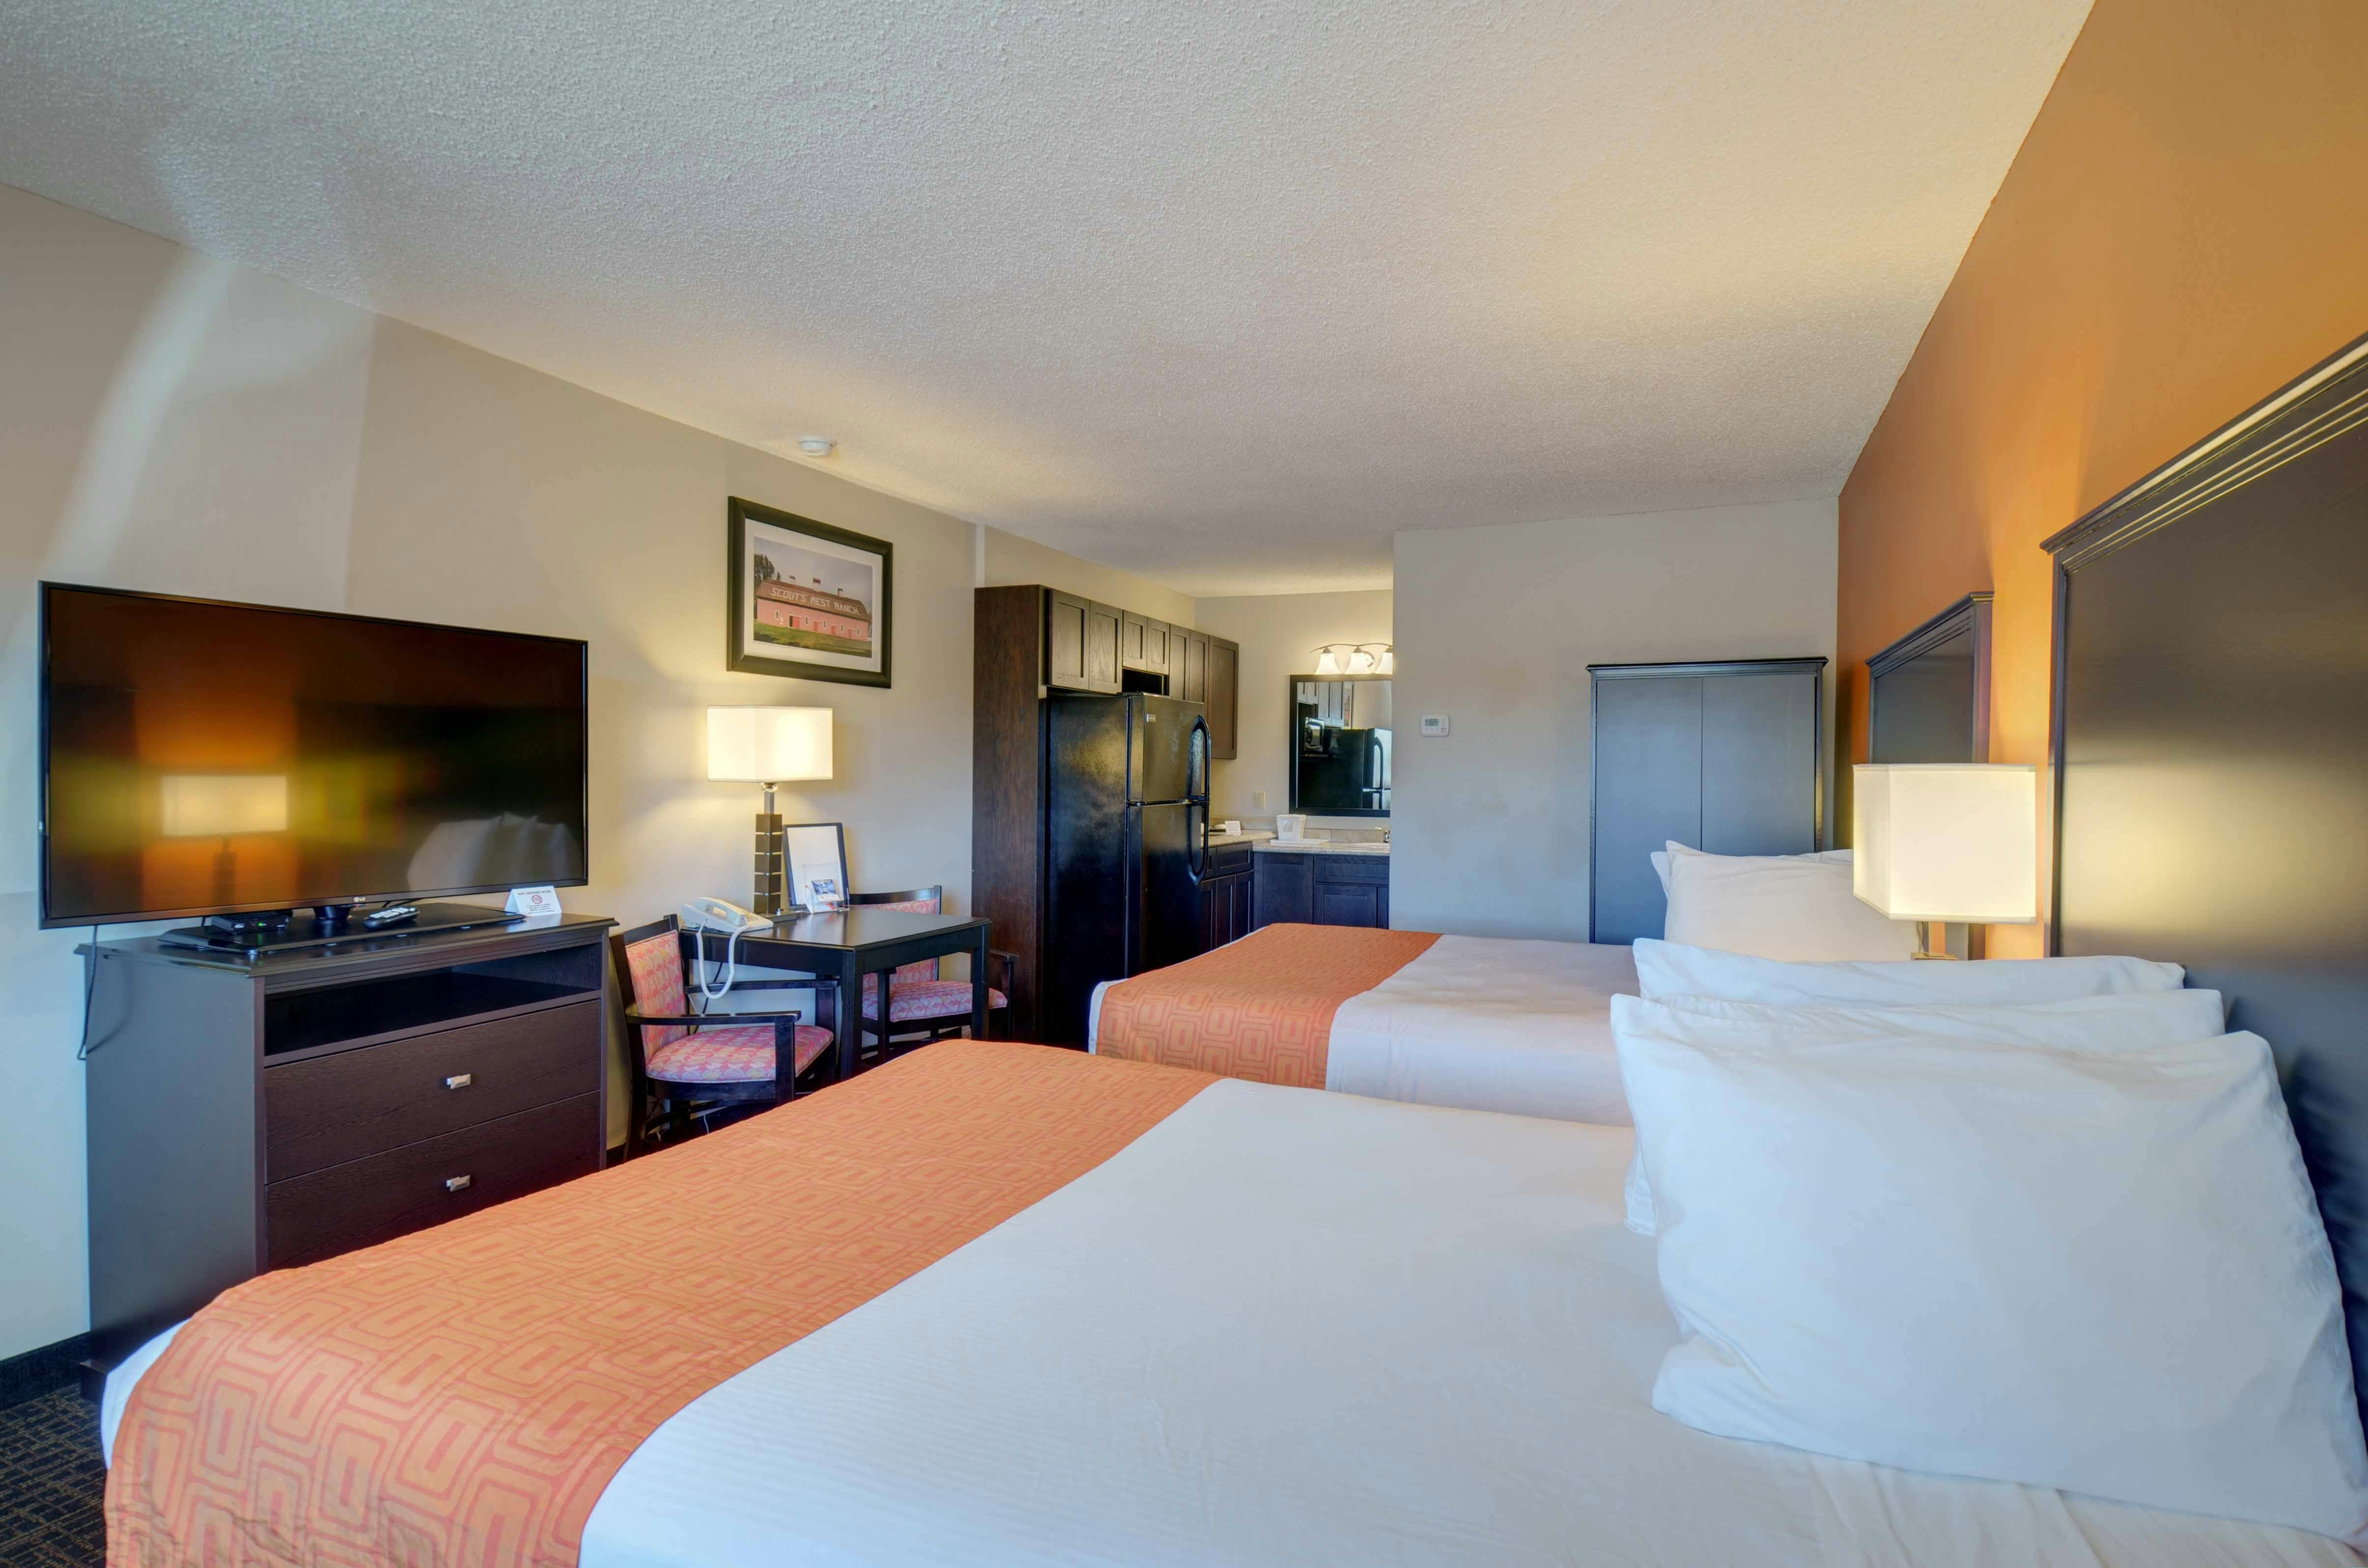 All rooms feature new furnishings plus 49" Smart TV, two queen beds.